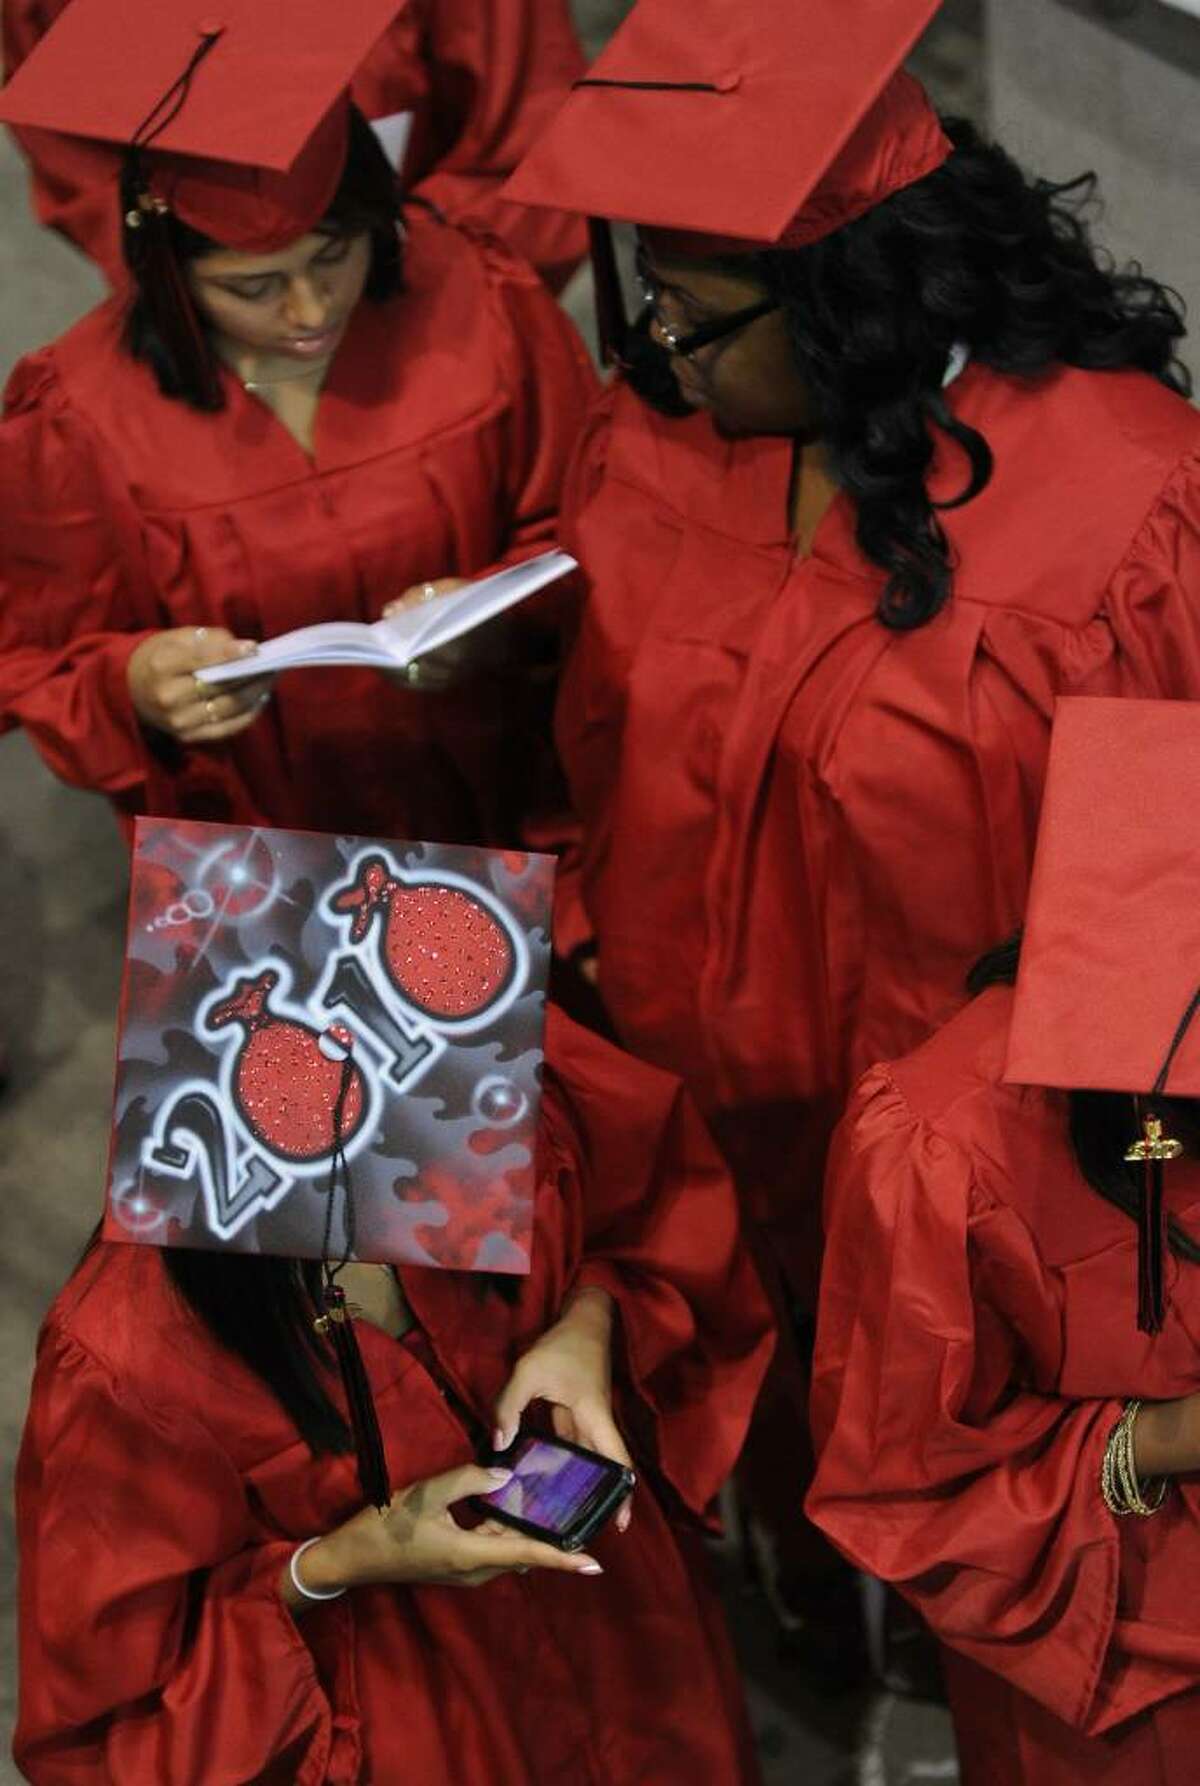 Graduate Jennifer Molina, bottom left, texts a message before heading in to be seated with her classmates, before the start of Central High School's Graduation Exercises at the Arena at Harbor Yard in downtown Bridgeport, Conn. on Thursday June 17, 2010.